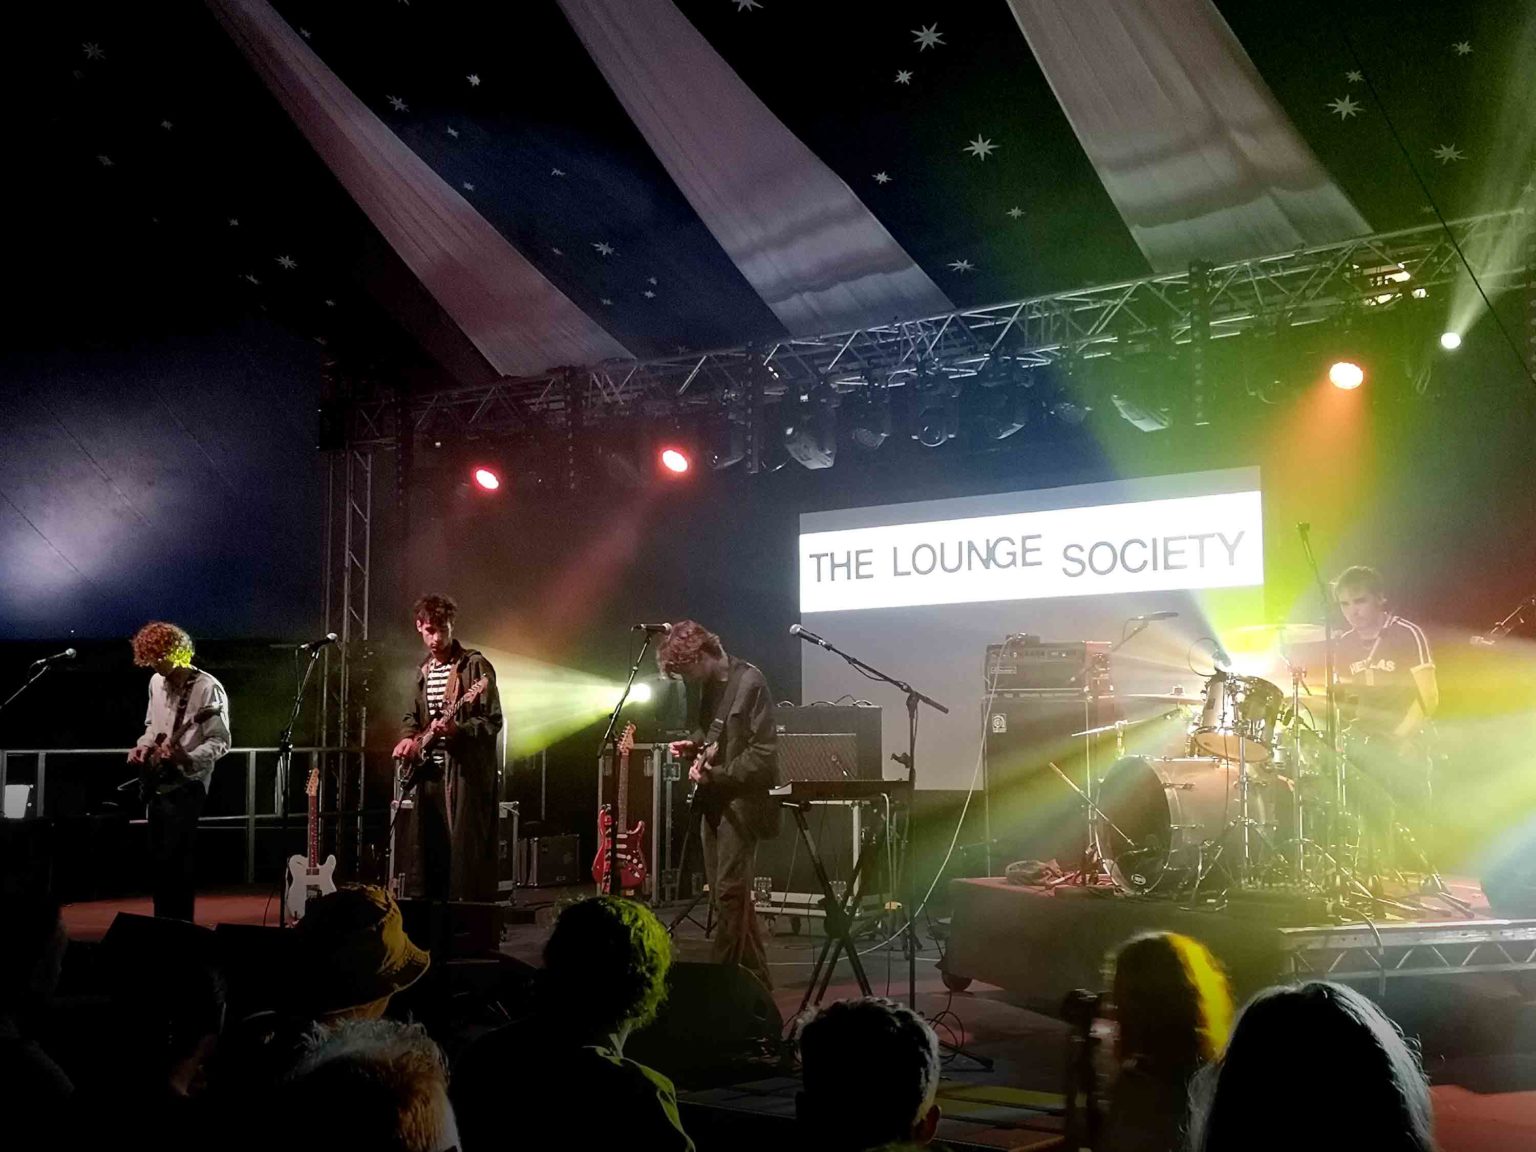 The Lounge Society